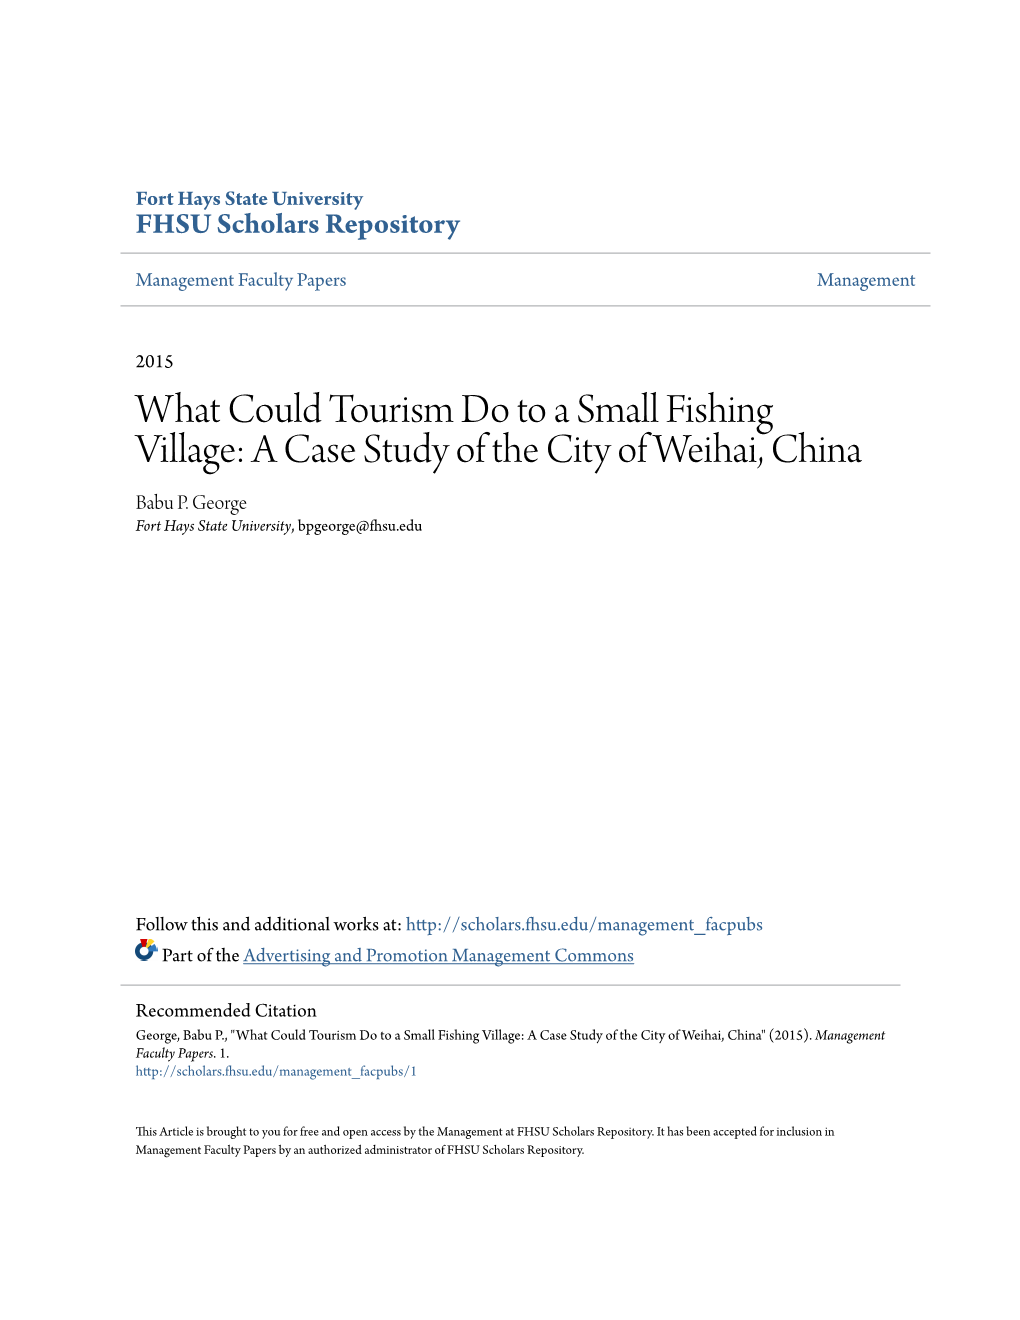 What Could Tourism Do to a Small Fishing Village: a Case Study of the City of Weihai, China Babu P